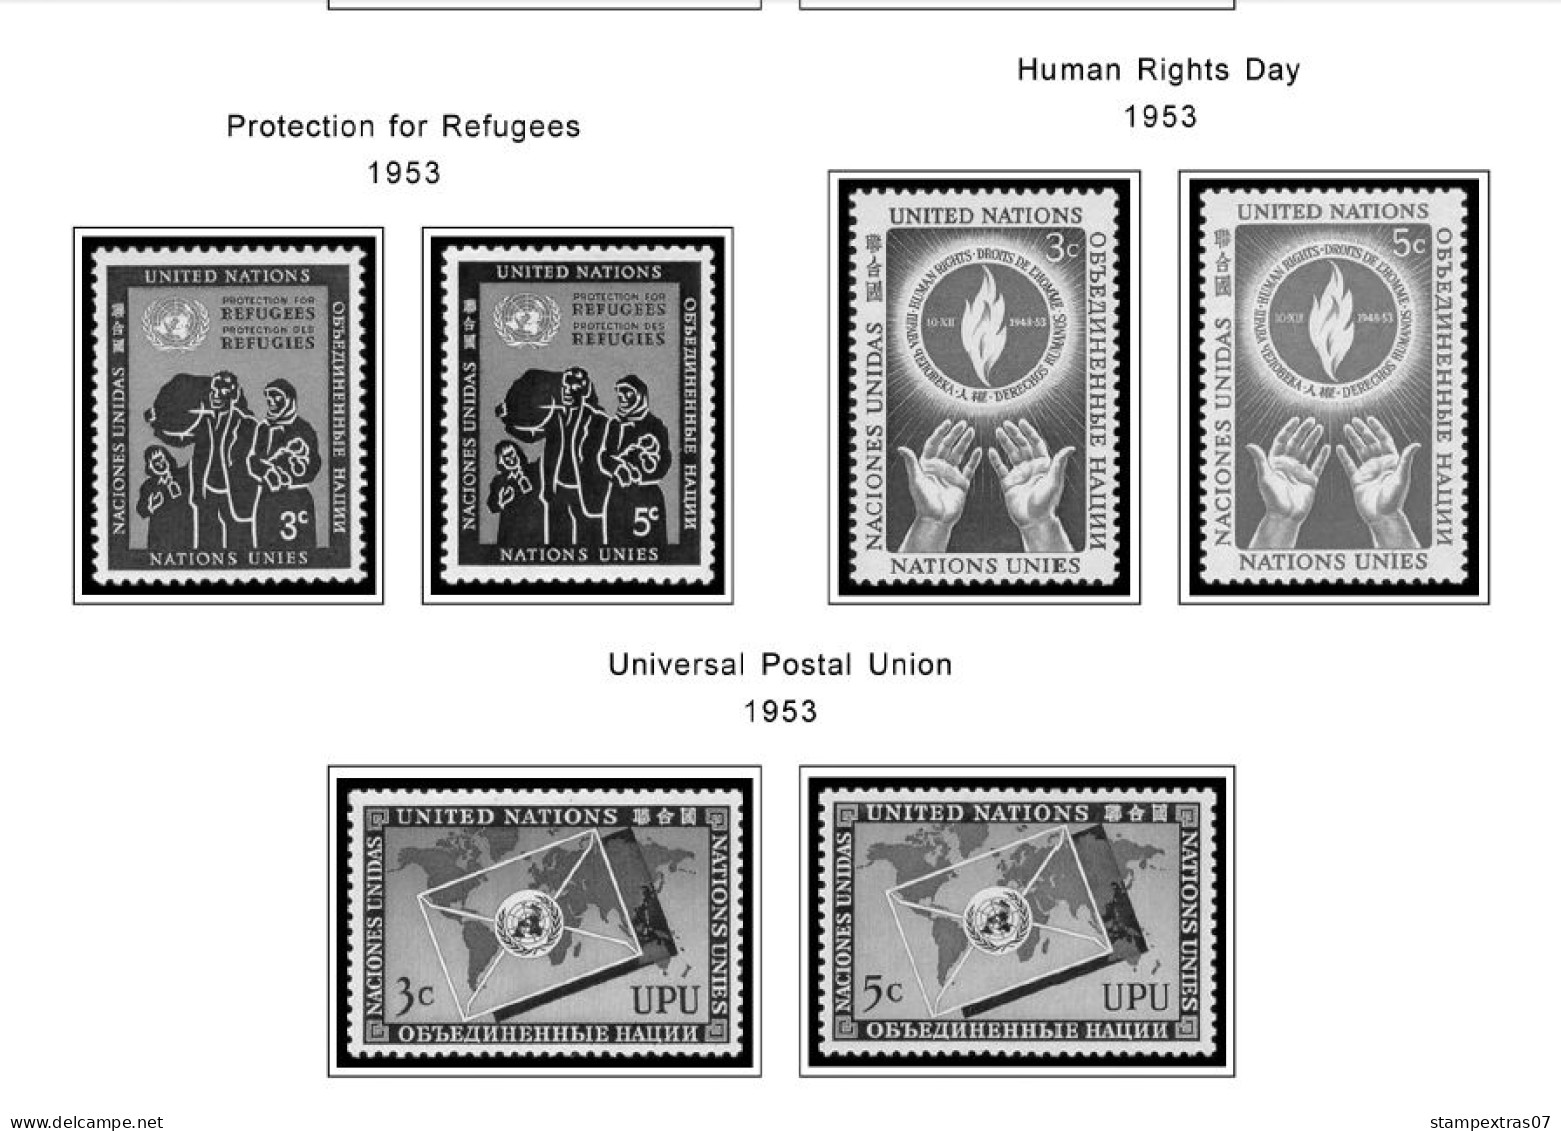 UNITED NATIONS - NEW YORK 1951-2020 STAMP ALBUM PAGES (229 B&w Illustrated Pages) - Anglais